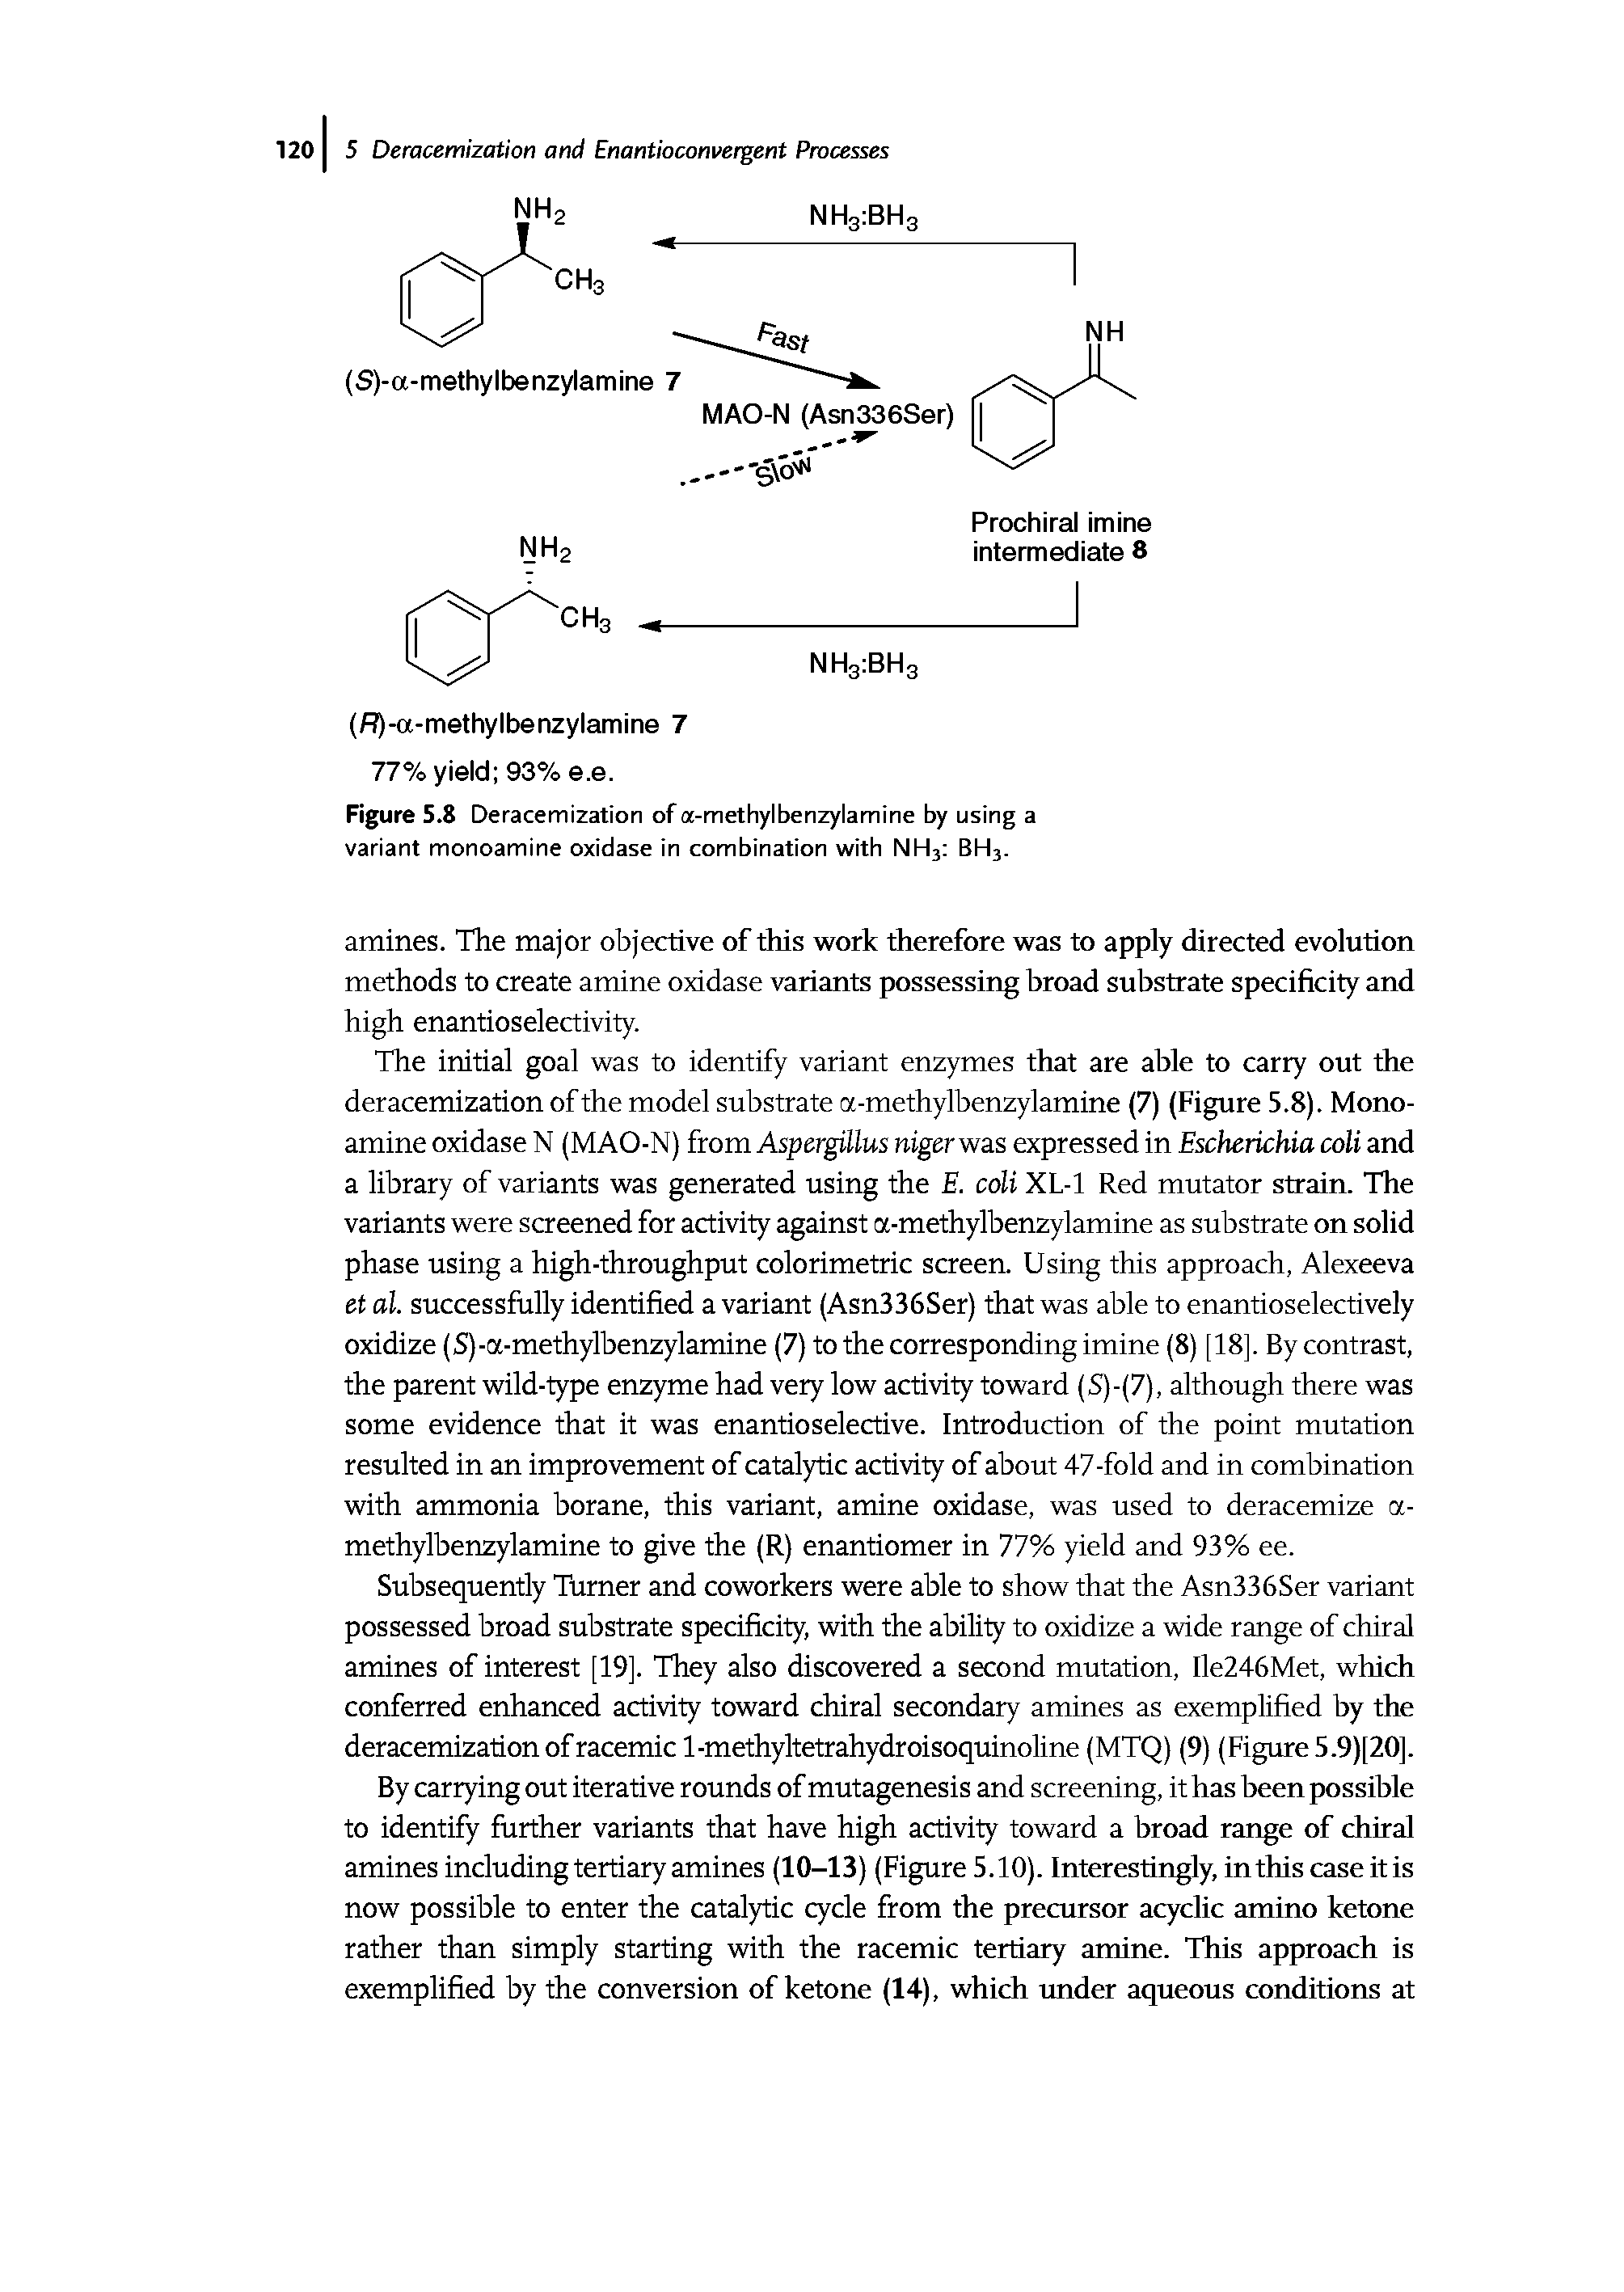 Figure 5.8 Deracemization of a-methylbenzylamine by using a variant monoamine oxidase in combination with NH3 BH3.